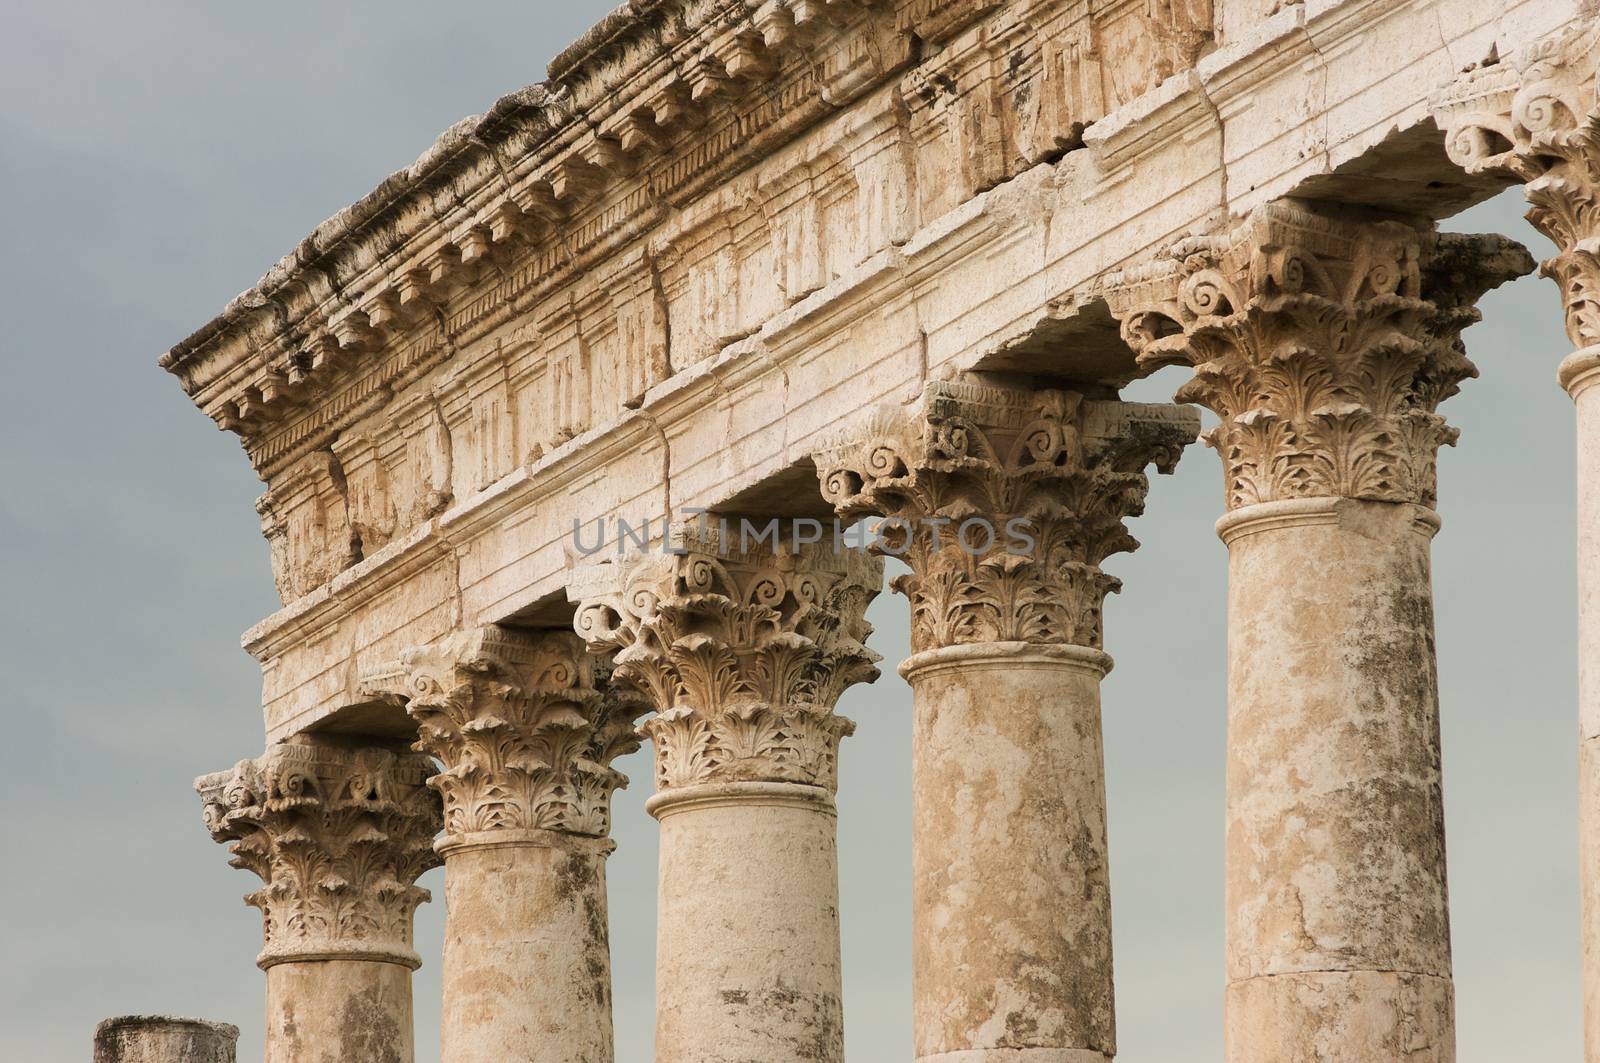 Apamea, Syria - May, 2009: Syria before the war. the Great Colonnade and triumphal arches in the impressive Apamea Greek and Roman city of Apamea in Syria. . Column tops the Corinthian order is the most ornate of the Greek orders, column having an ornate capital decorated with two rows of acanthus leaves.The site includes the famous Great Colonnade, one of the longest in the world. Because civil war in Syria that started in 2011 the Apamea ruins have been damaged and looted by treasure hunters.